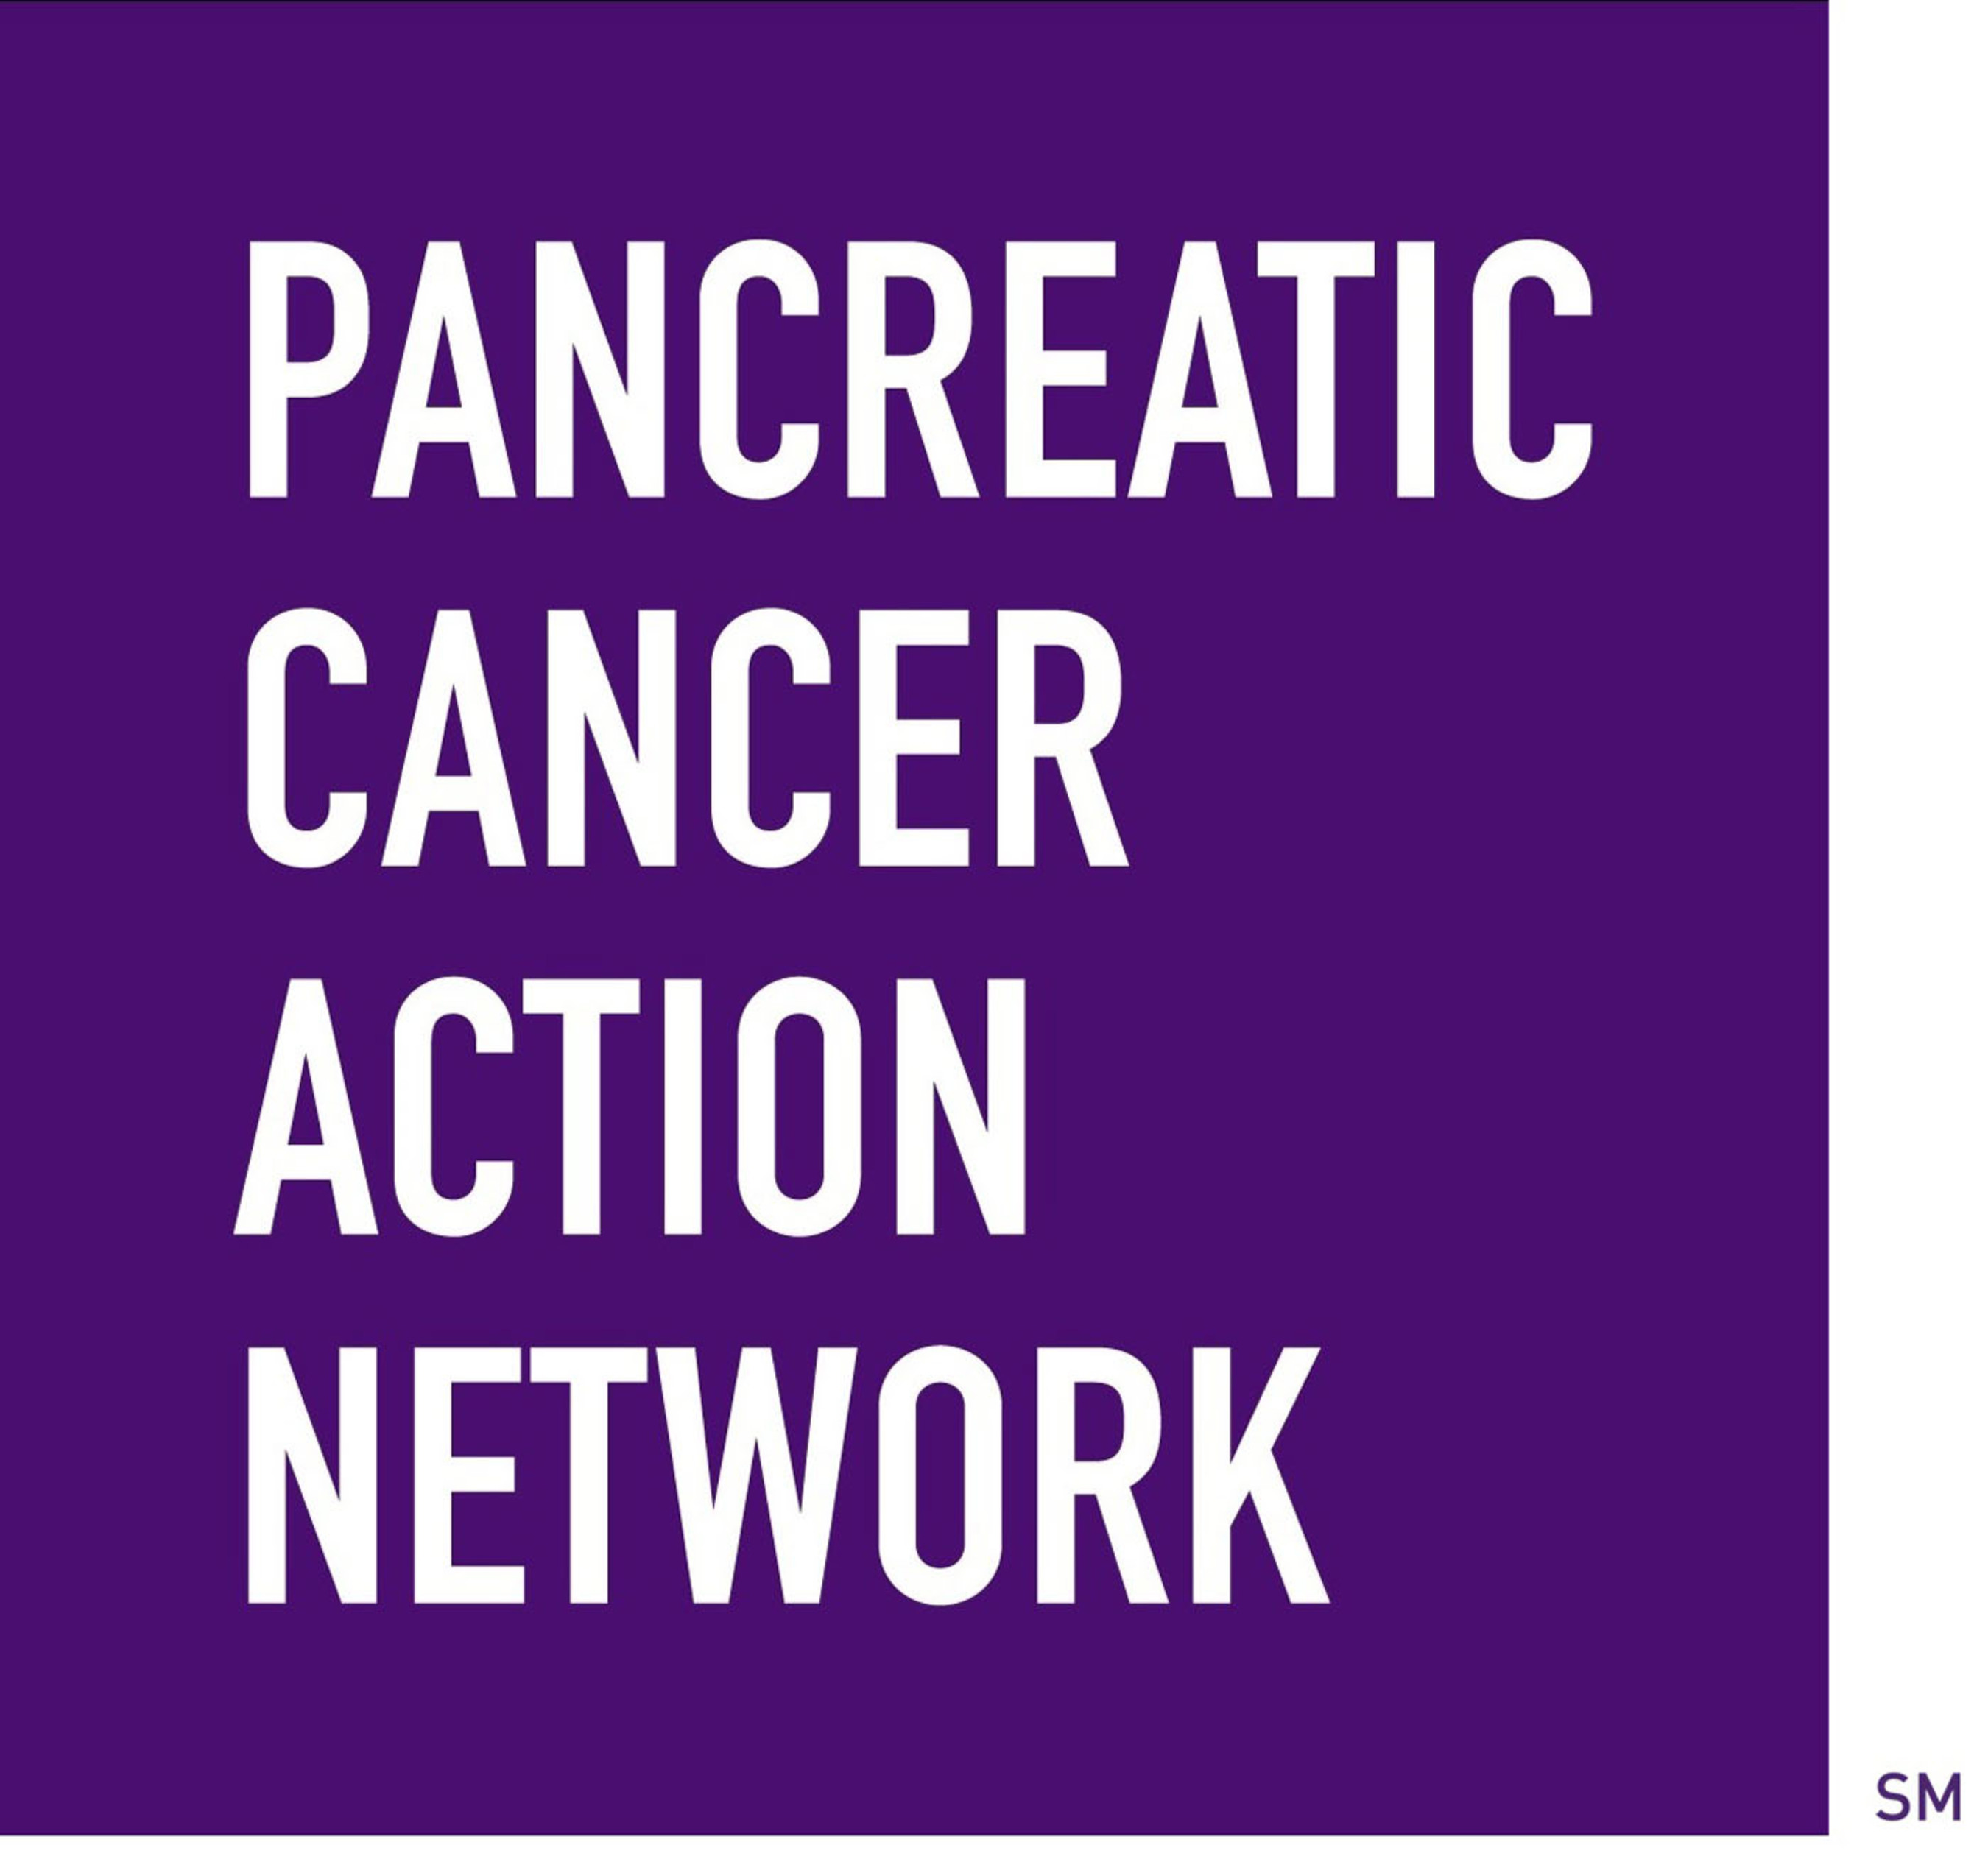 Pancreatic Cancer Action Network logo